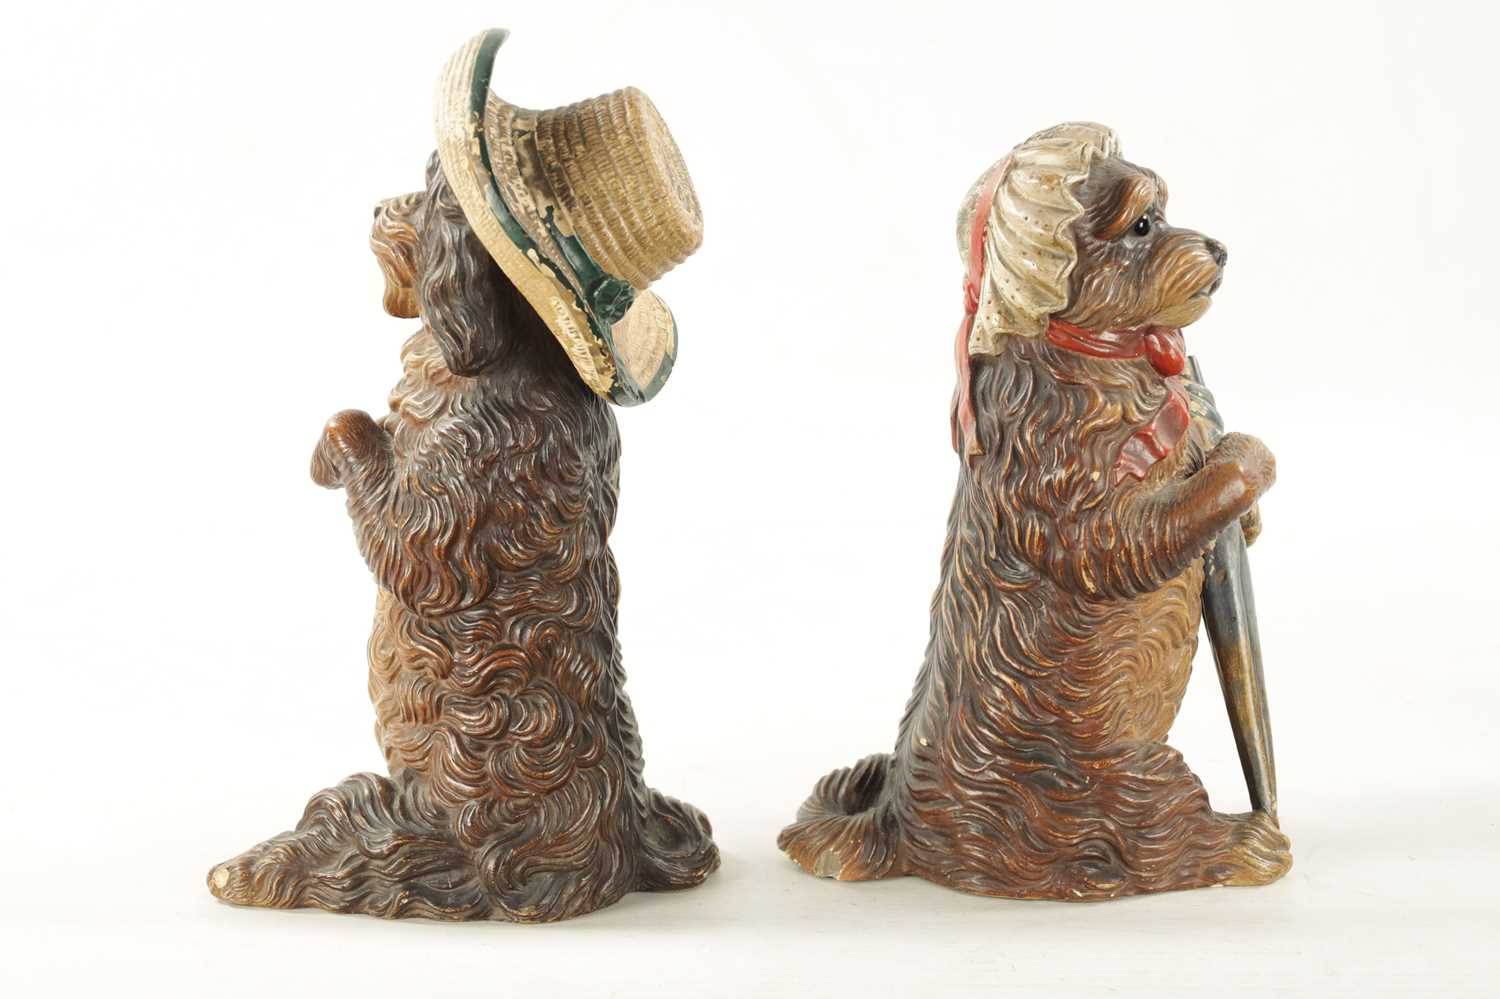 A PAIR OF LATE 19TH CENTURY AUSTRIAN COLD-PAINTED TERRACOTTA MODELS OF DOGS - Image 7 of 8